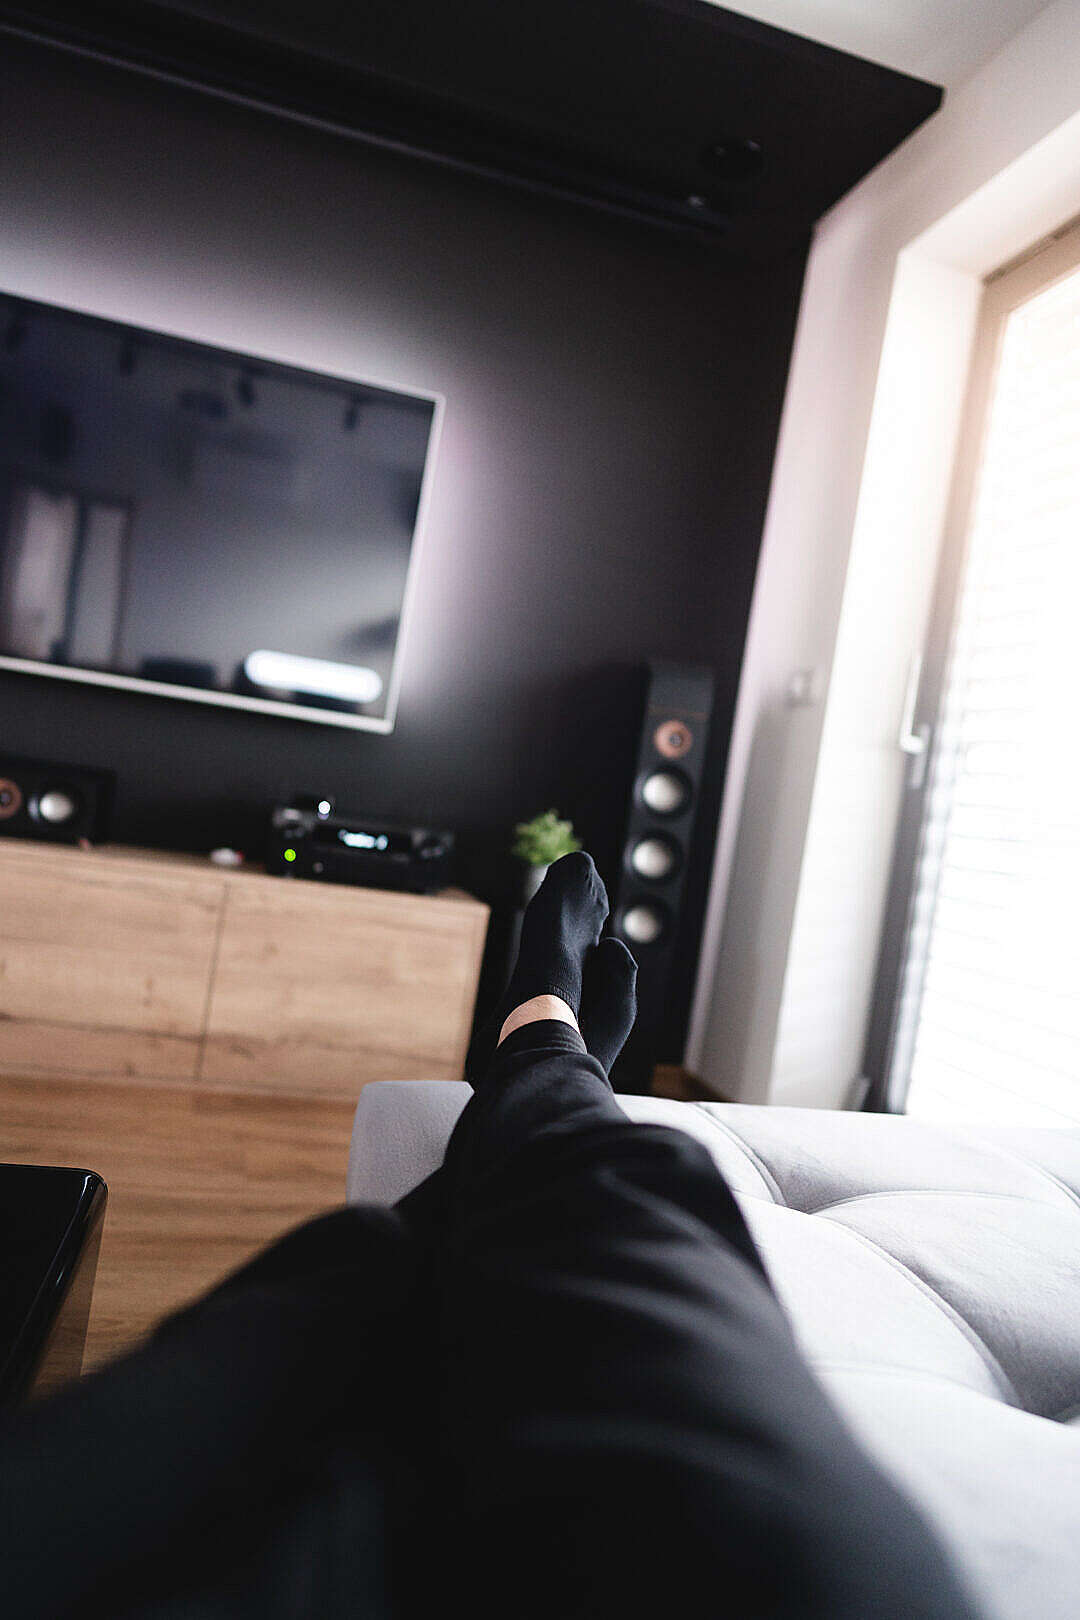 Download Man Relaxing on a Sofa in a Home Theater Living Room FREE Stock Photo